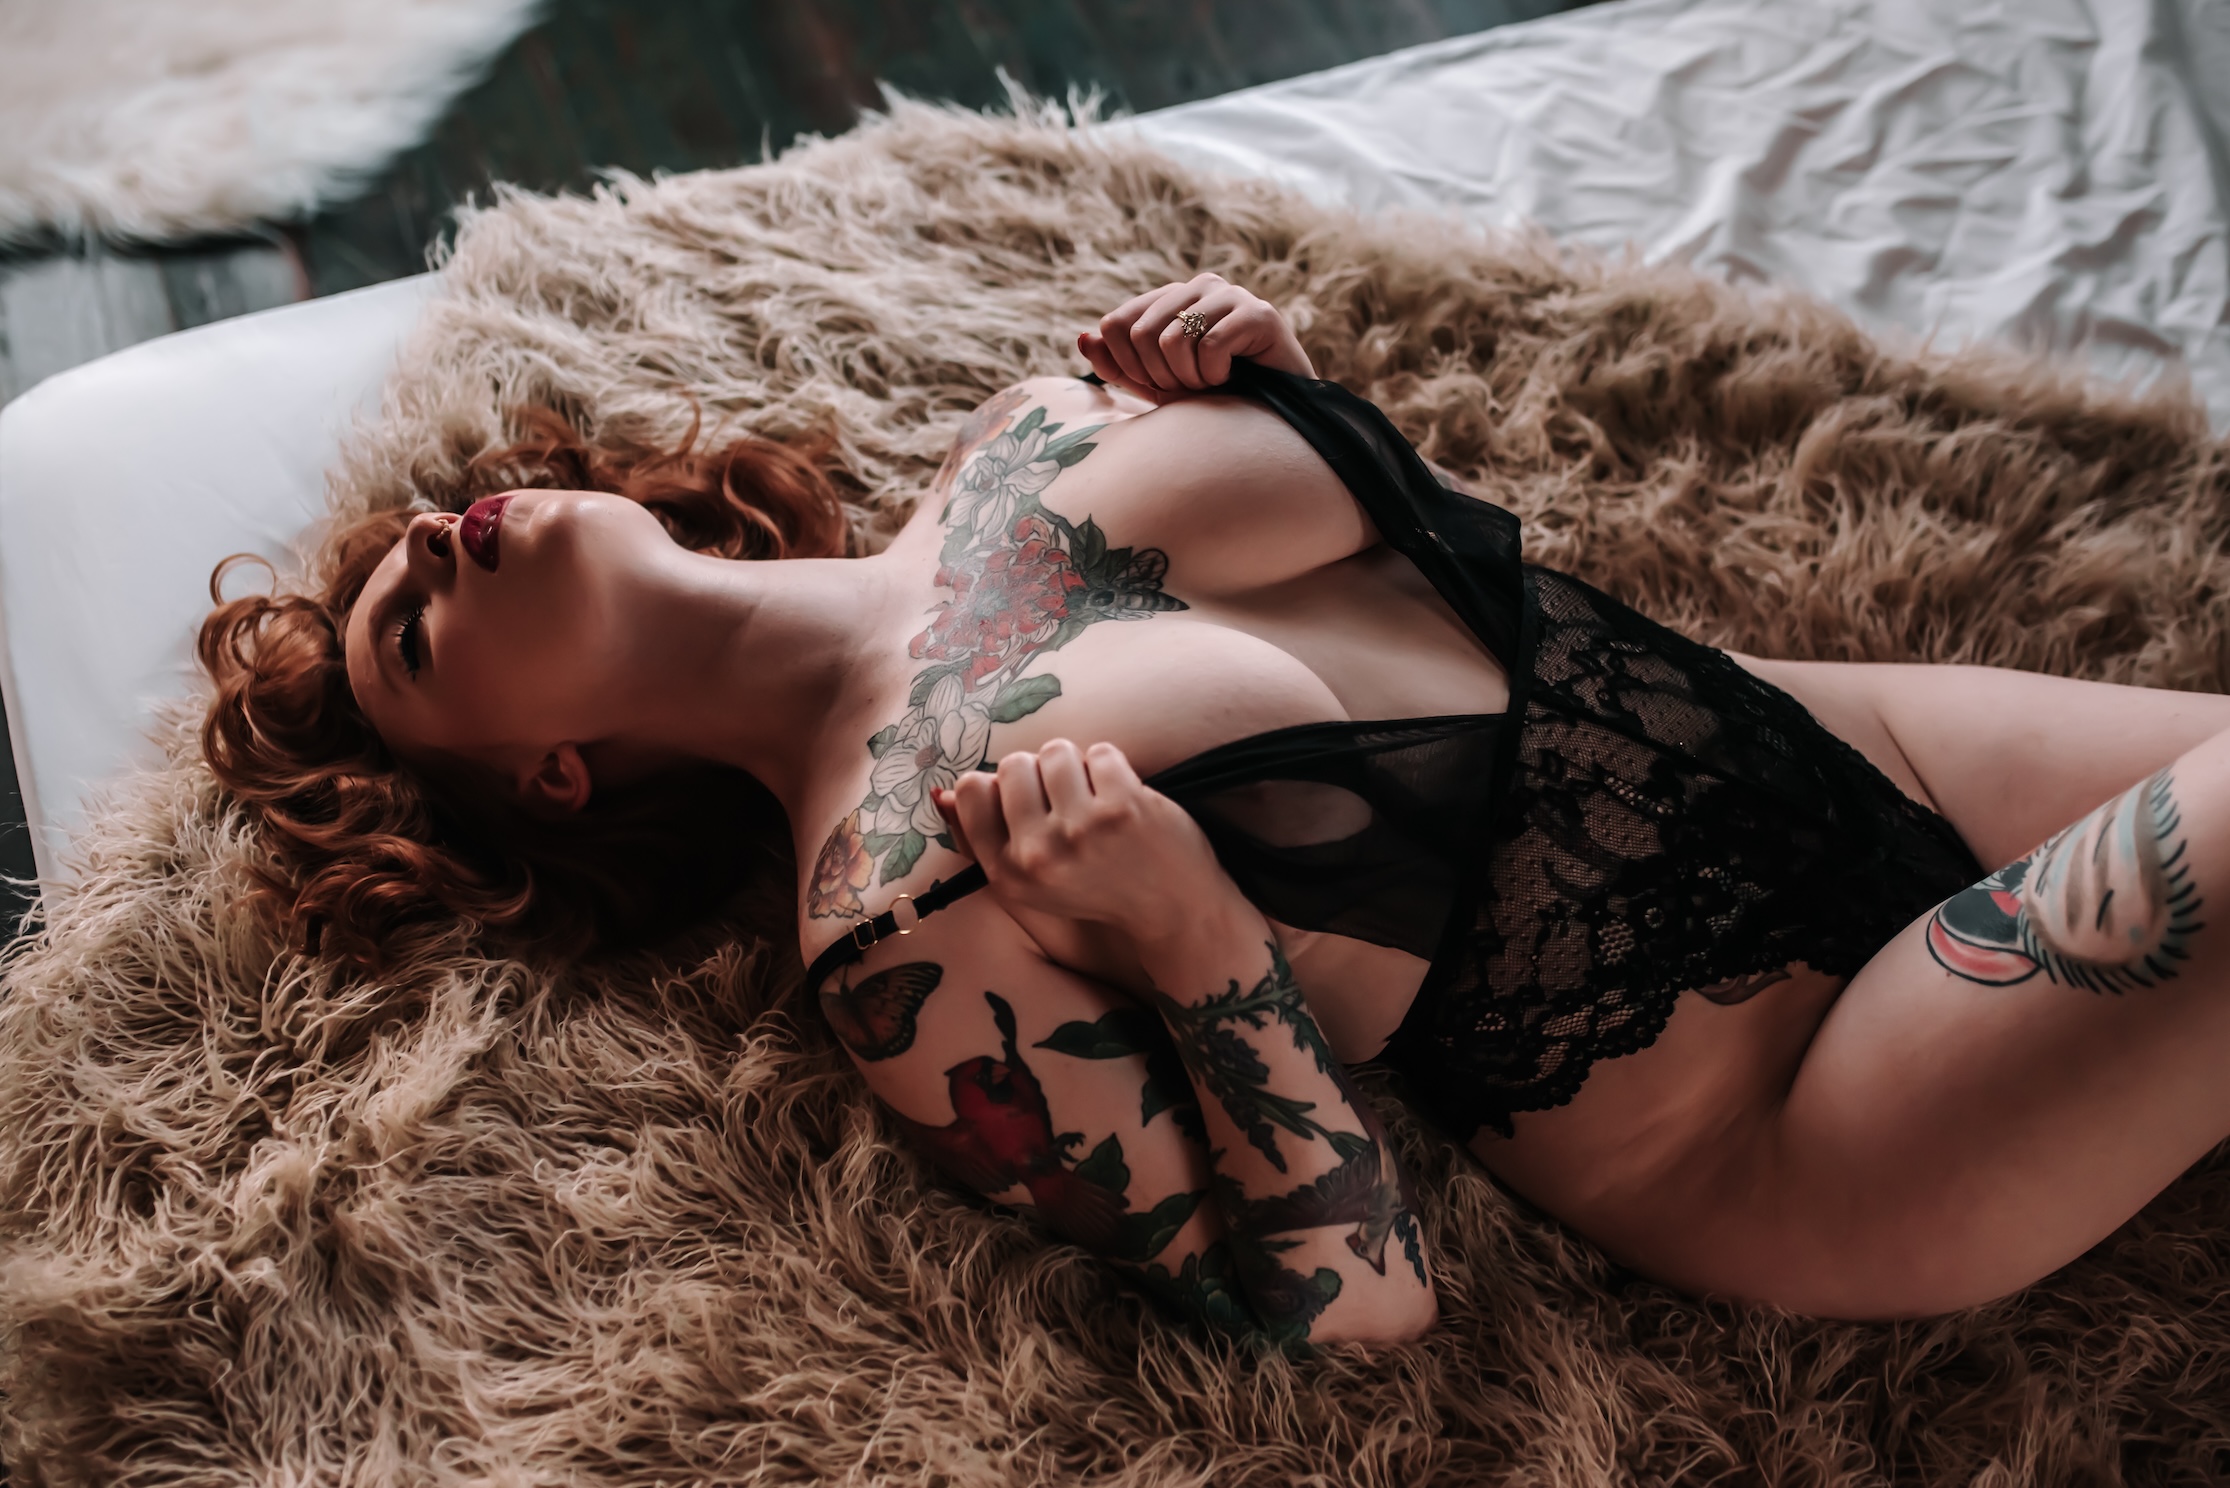 woman laying back on fur rug while wearing black lingerie